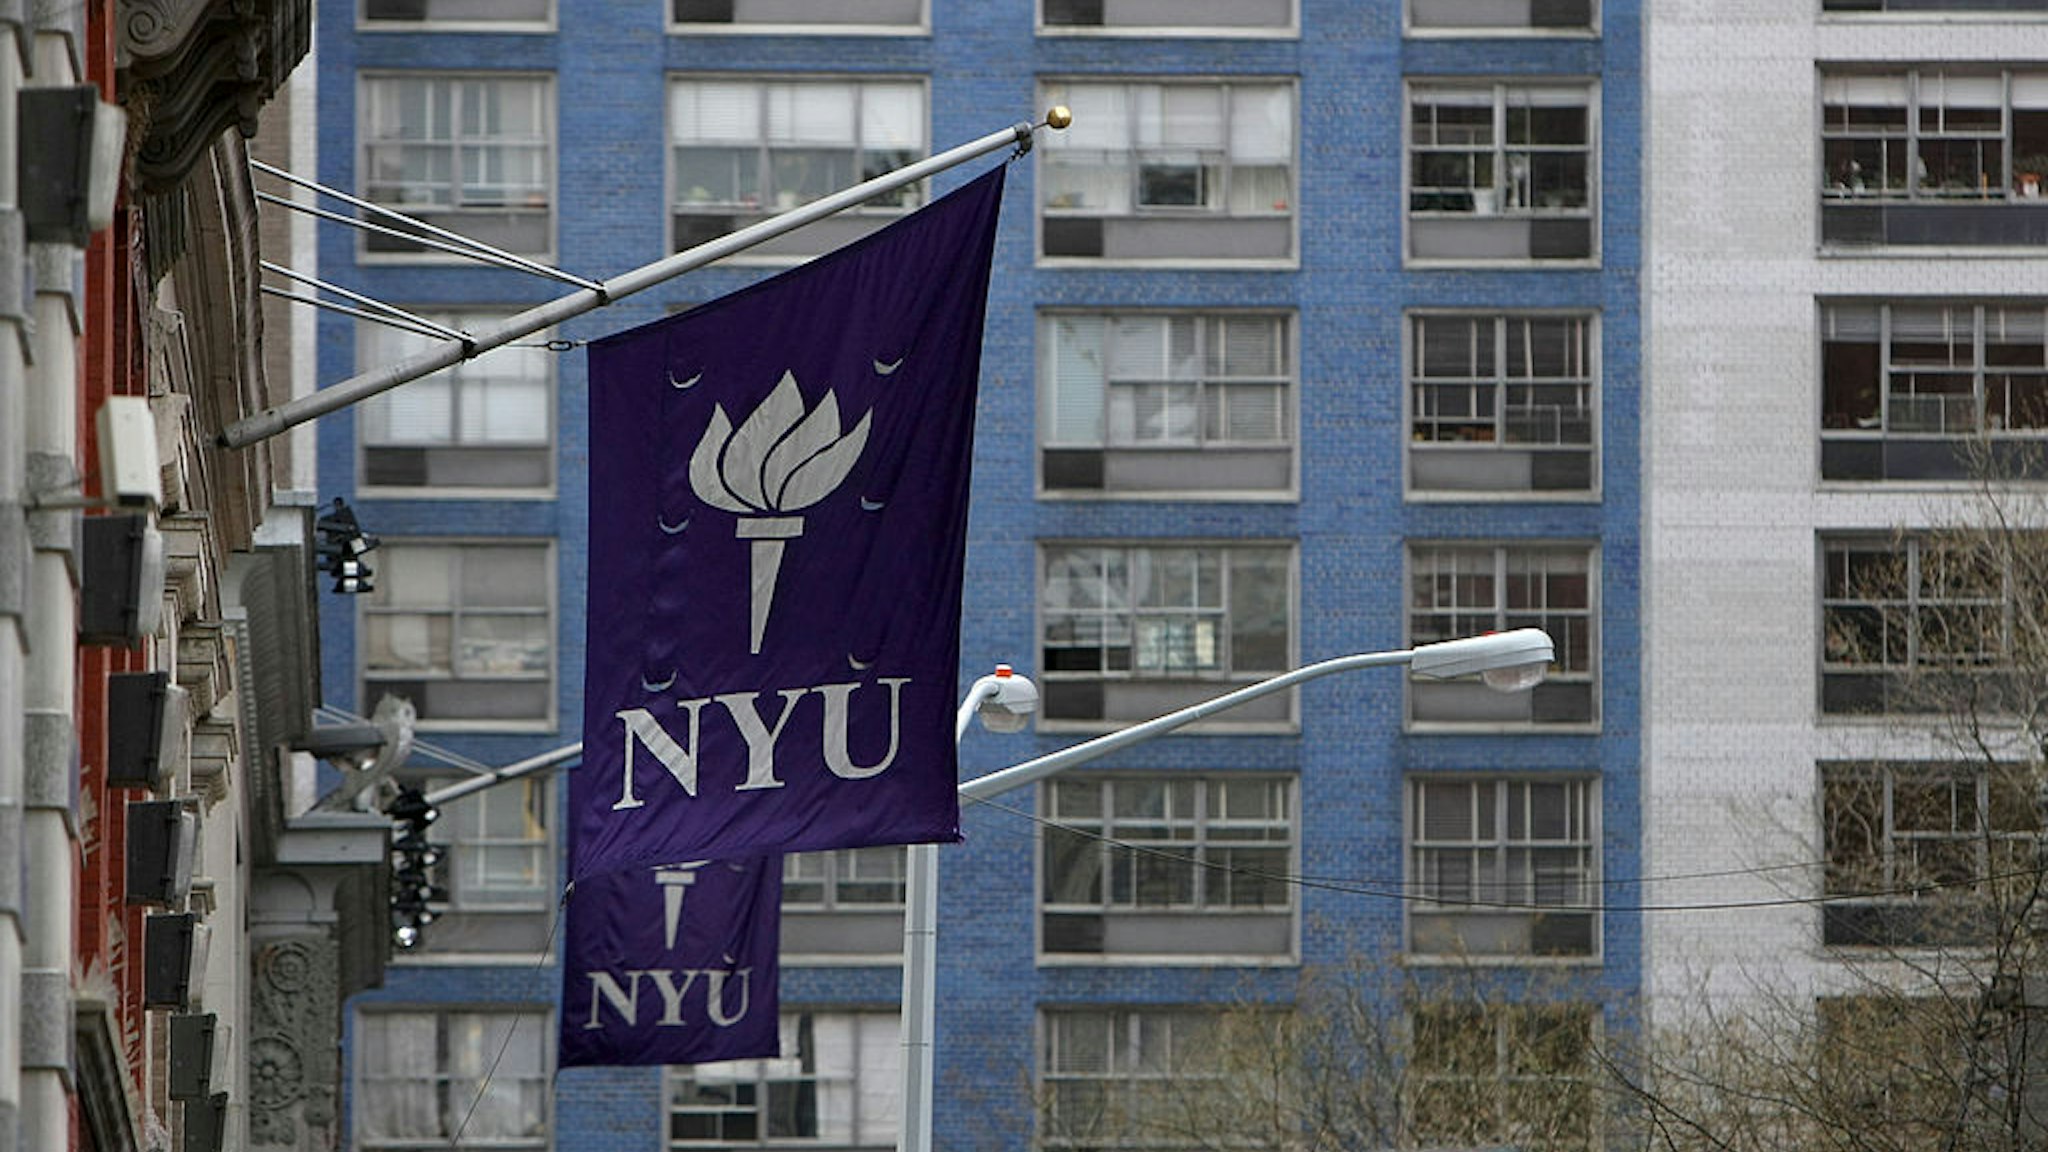 New York University banners hang from a building in New York, U.S., on Monday, April 5, 2010. New York University will face financial hurdles and a fight with Greenwich Village preservationists as it tries to take over more space and compete harder with uptown rival Columbia University.